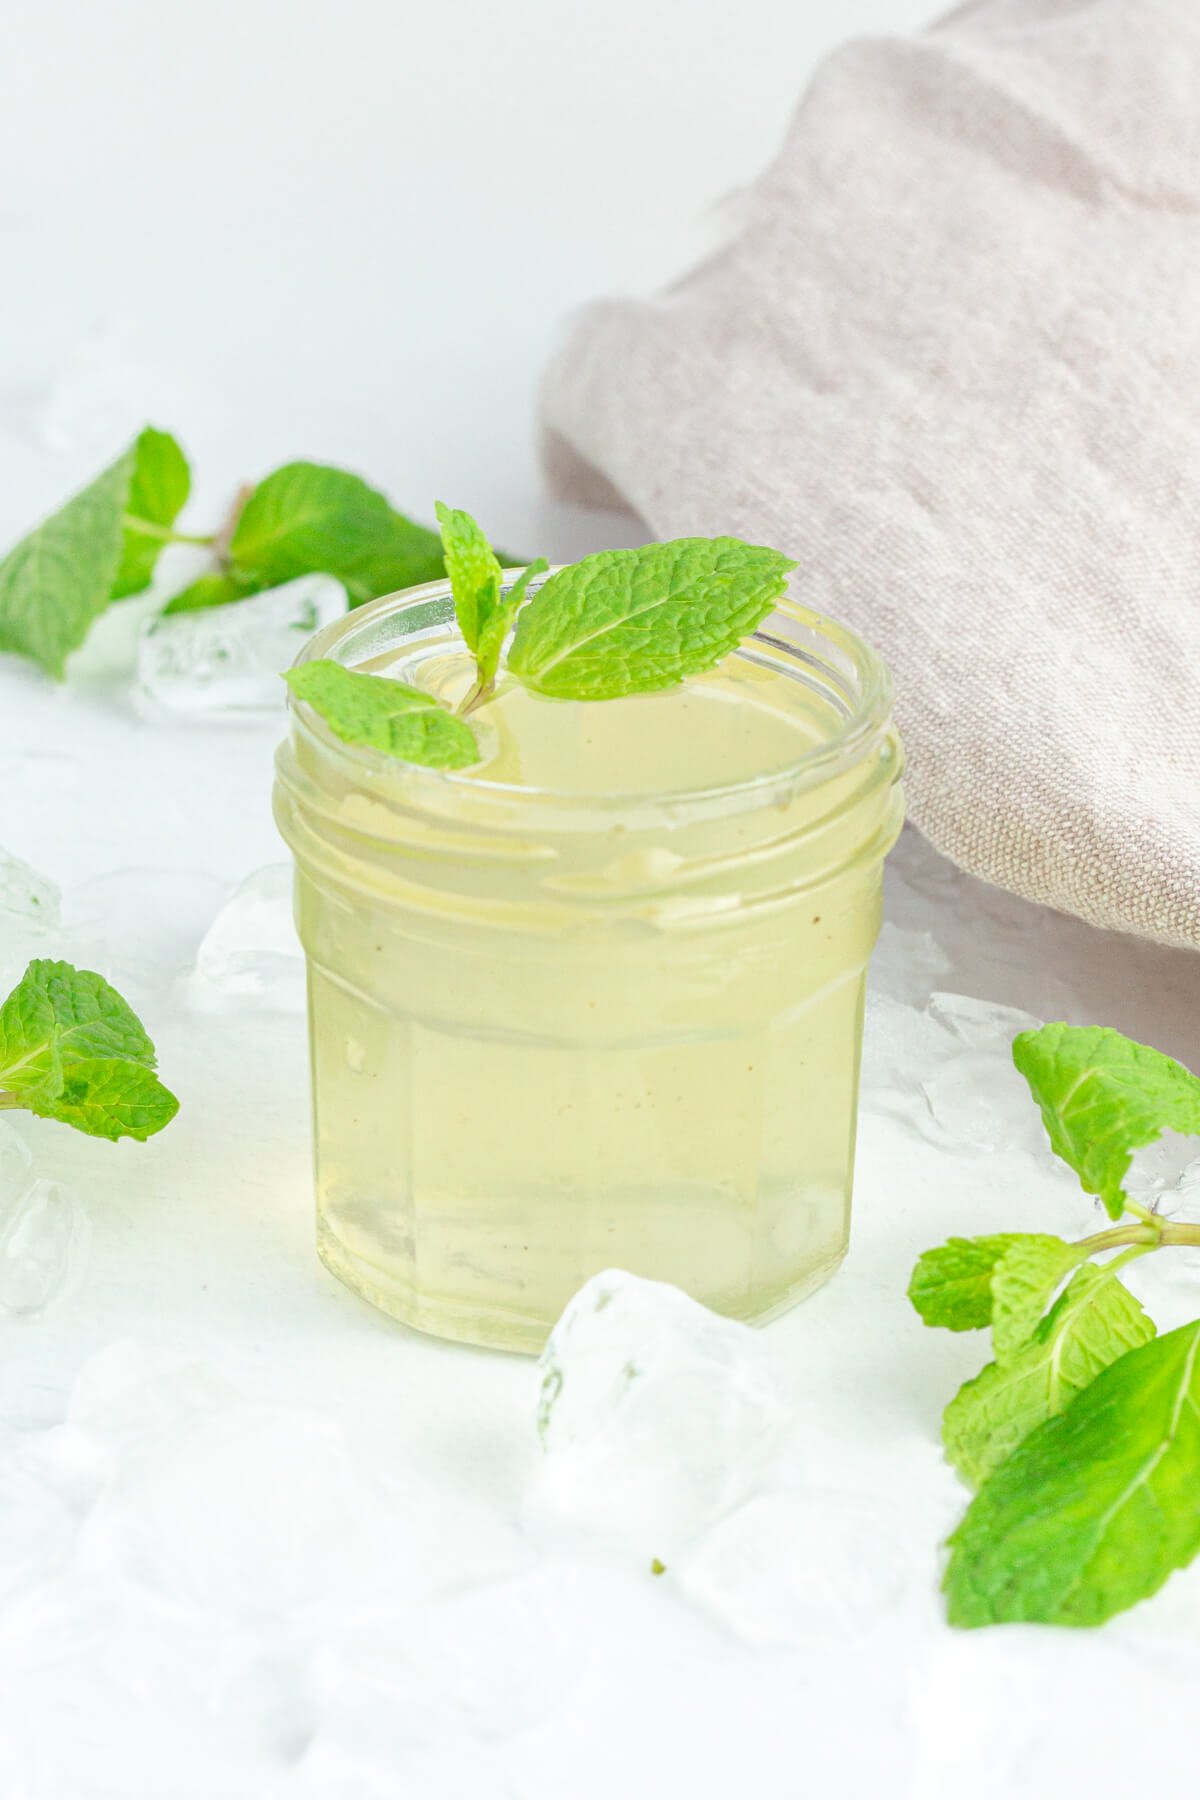 glass jar of mint syrup with fresh mint garnished on top surrounded by a brown tea towel, fresh mint and crushed ice.